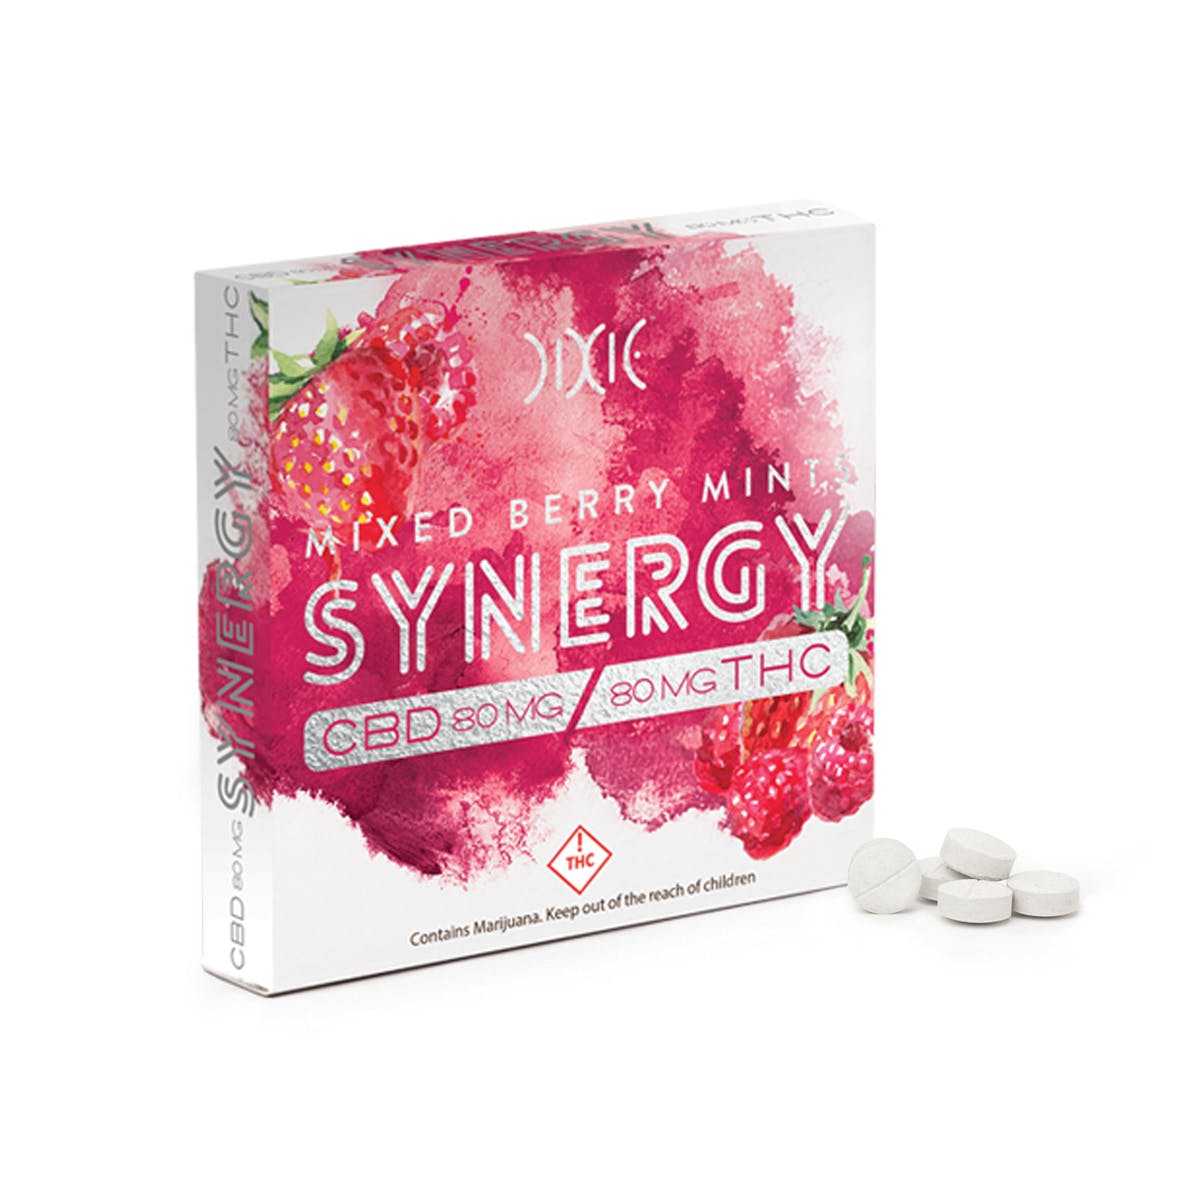 marijuana-dispensaries-the-health-center-uptown-adult-use-in-denver-synergy-mixed-berry-mints-11-80mg